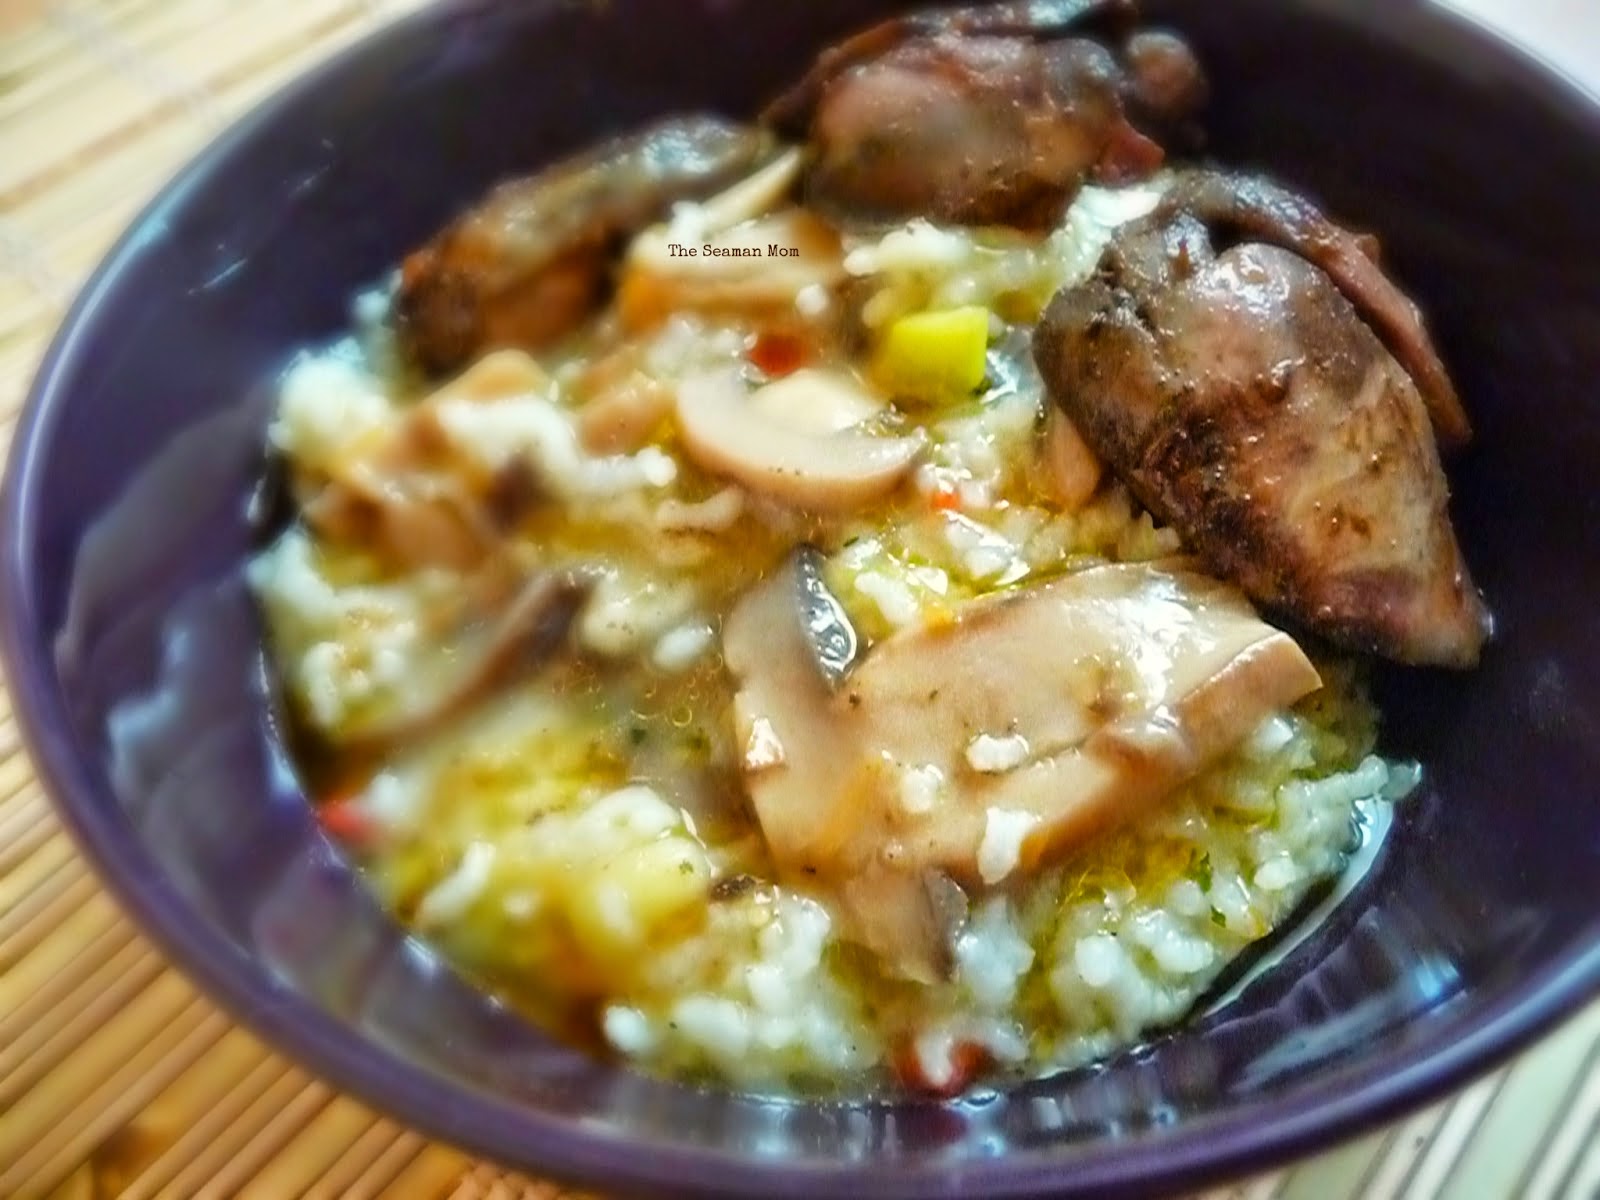 http://www.theseamanmom.com/2014/04/chicken-liver-and-rice-with-mushrooms-recipe.html#.U2y1qFe9ahI